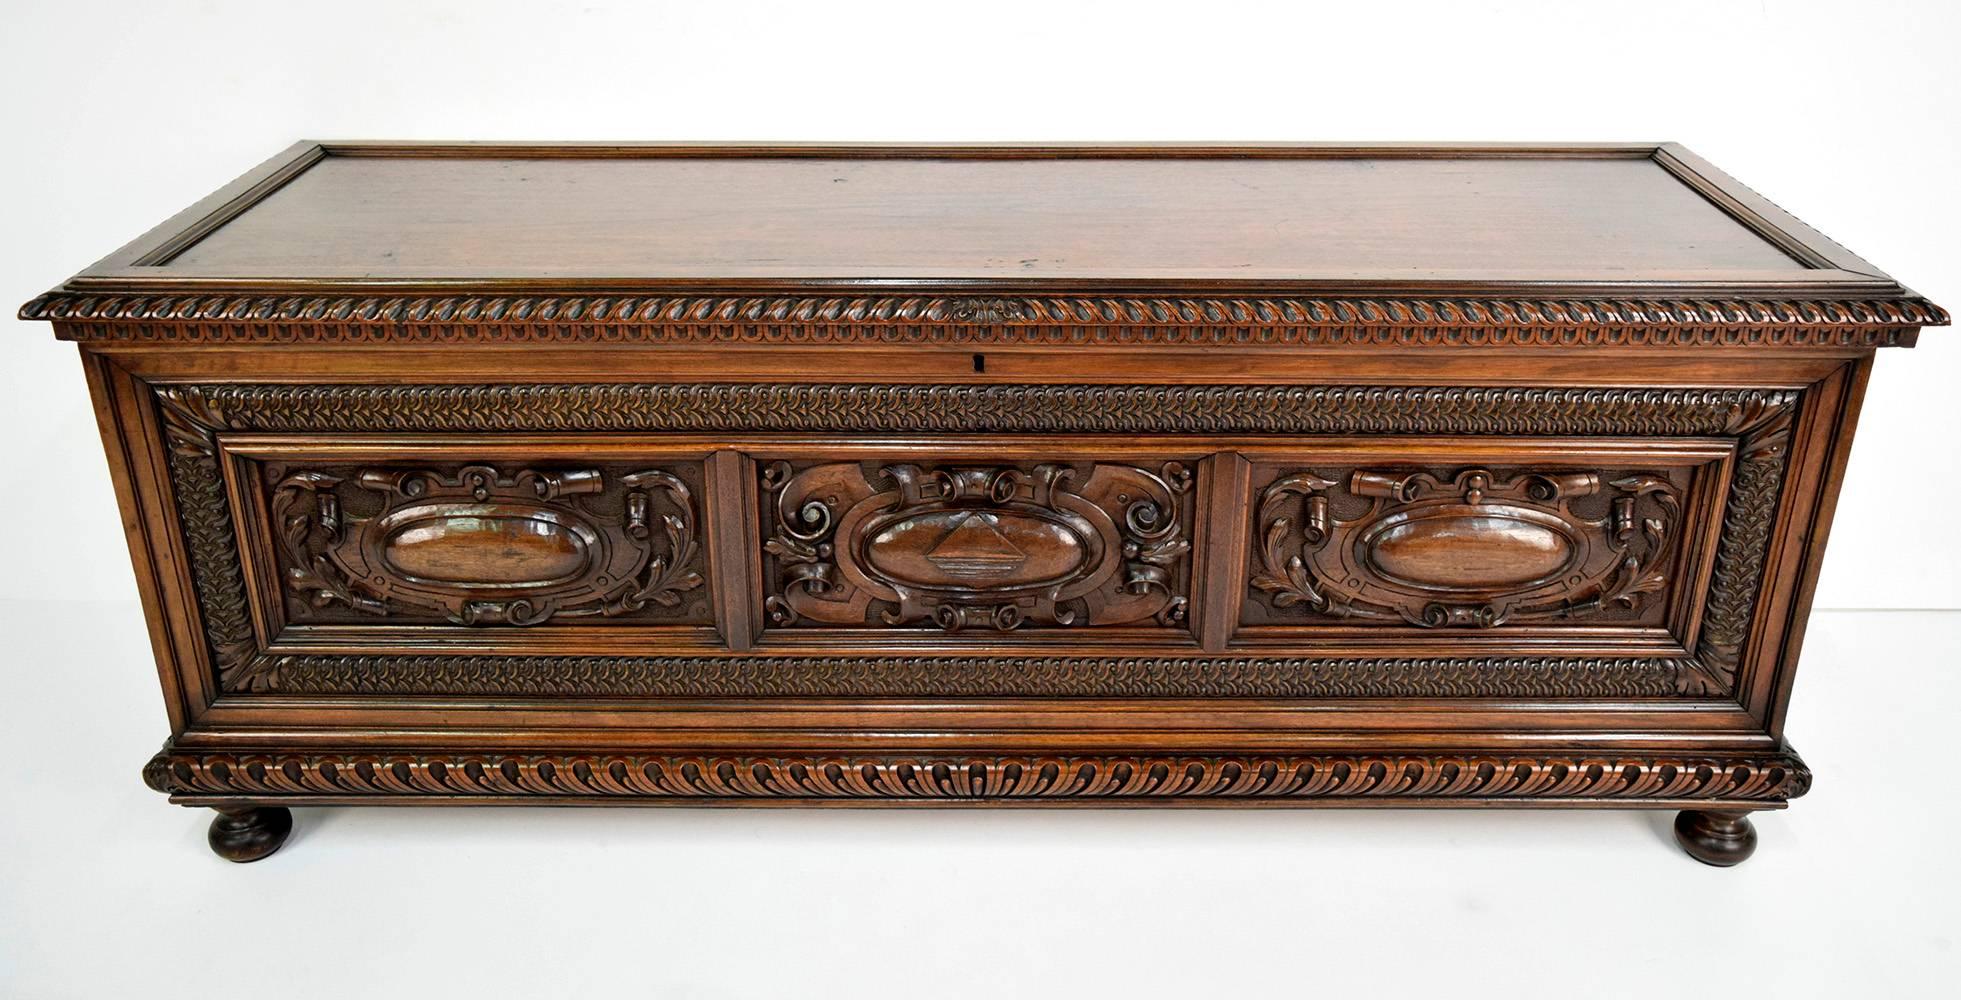 This one of a kind 1830's Antique Renaissance-style trunk or chest is made of solid walnut wood with its original walnut finish. There are stunning hand carved decorations on the front and on the top and sides. The chest is adorned with its original